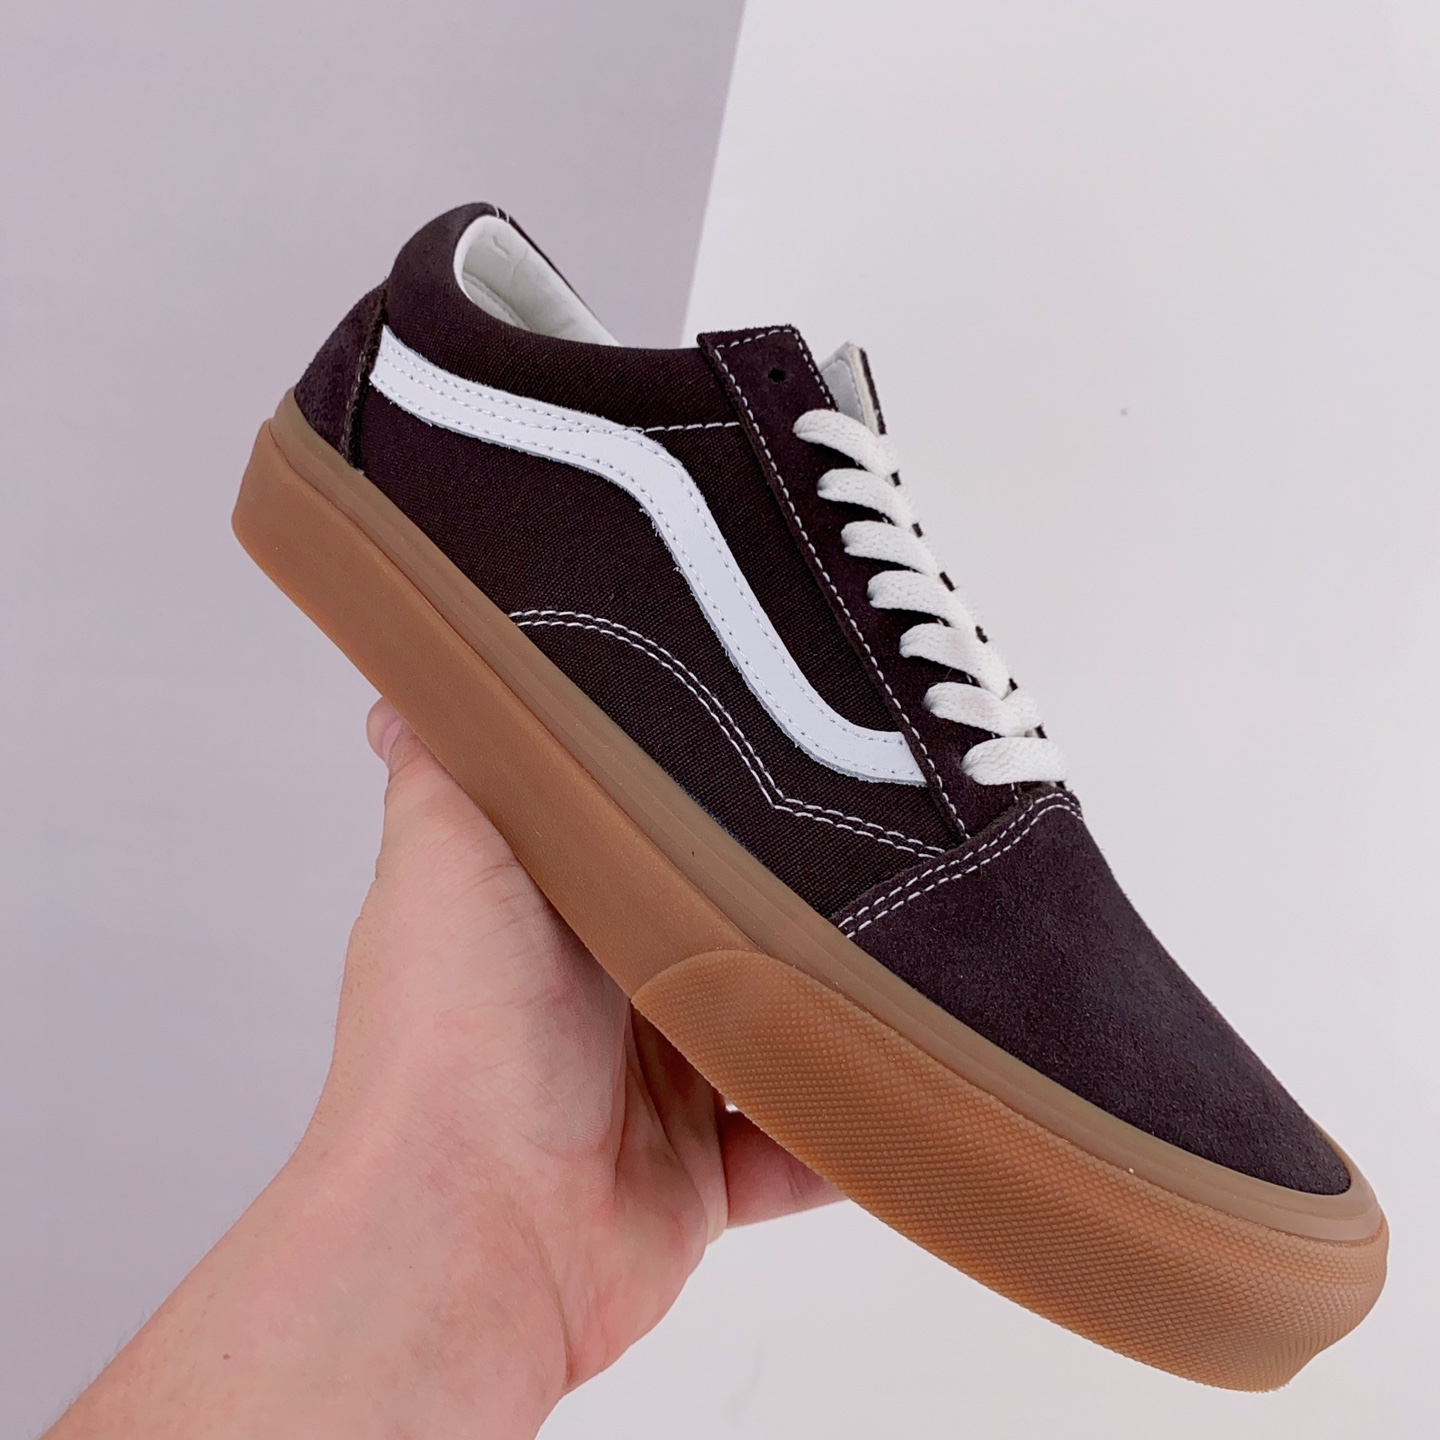 Vans Old Skool BROWN VN0A5KRSCHC - Classic Style with a Brown Twist